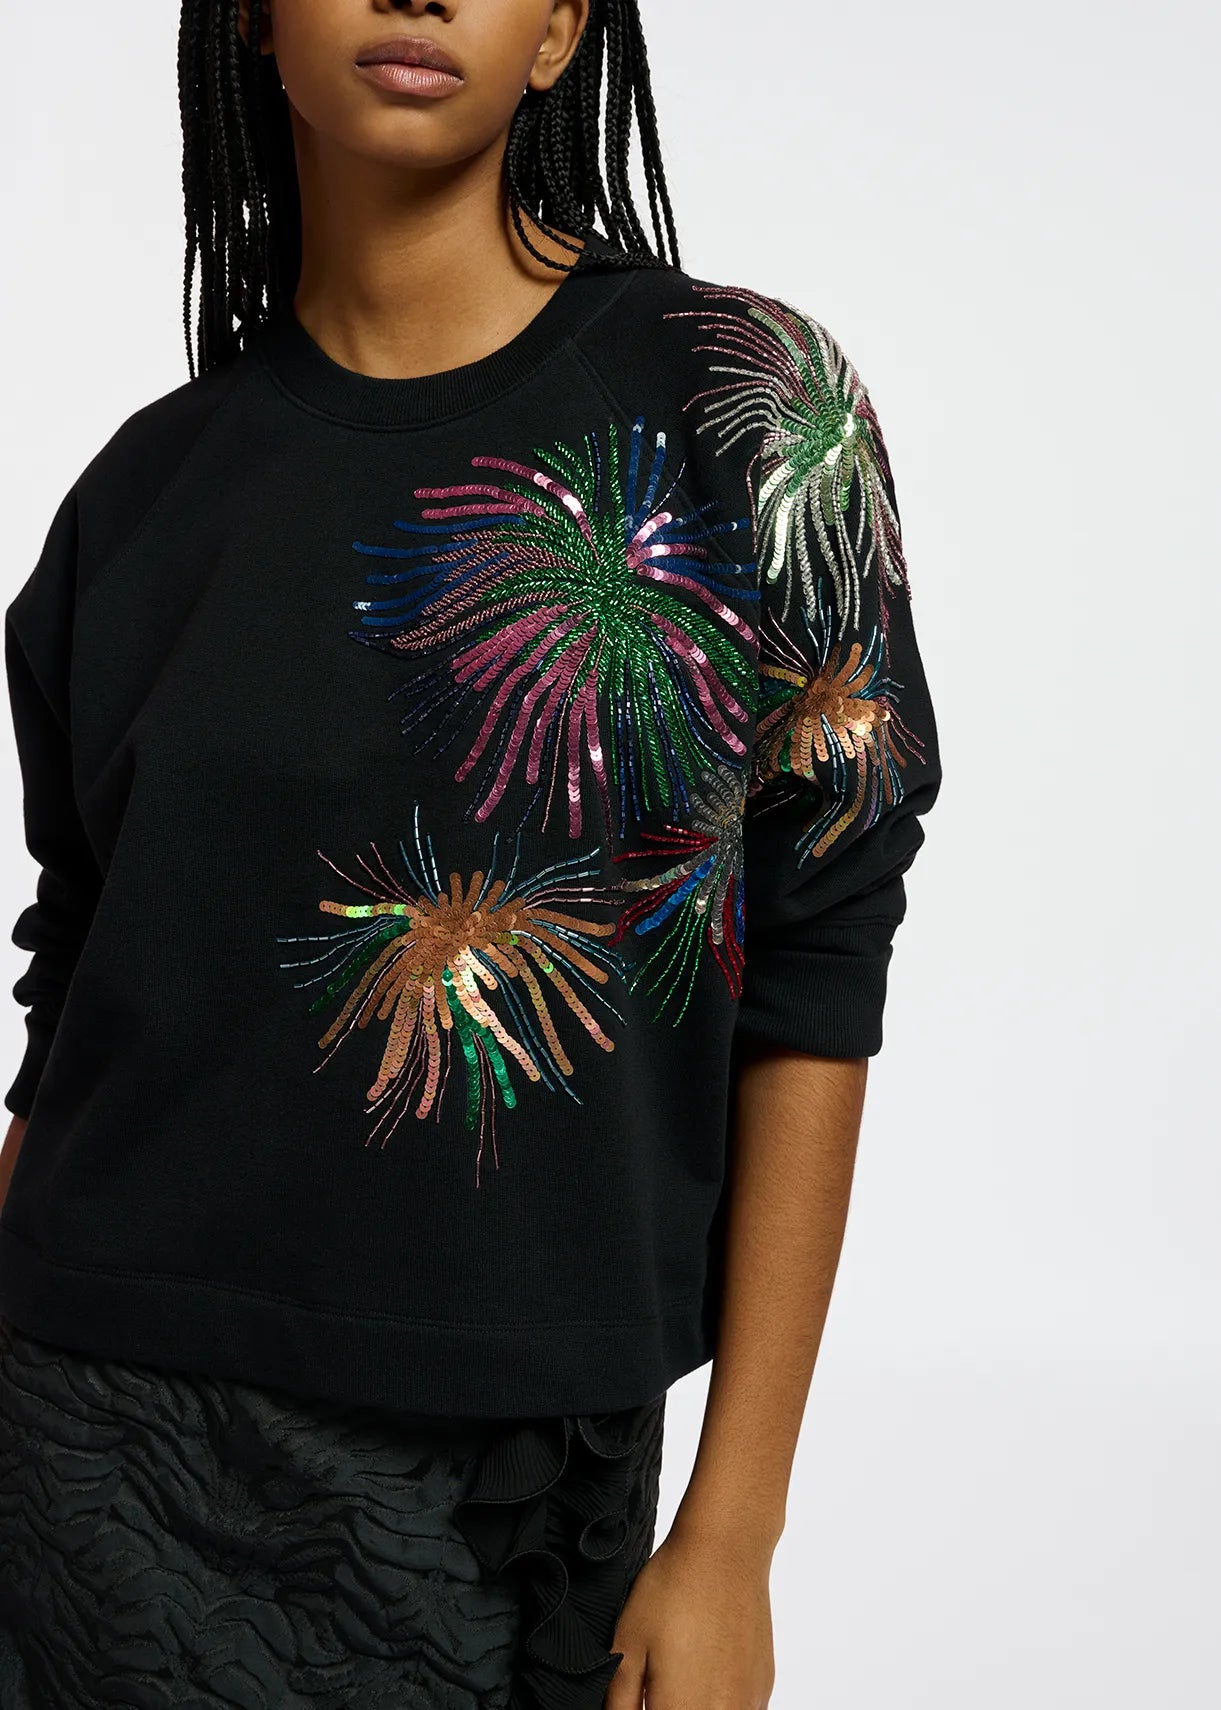 Esweat Embroidered Sweater in Combo1 Black